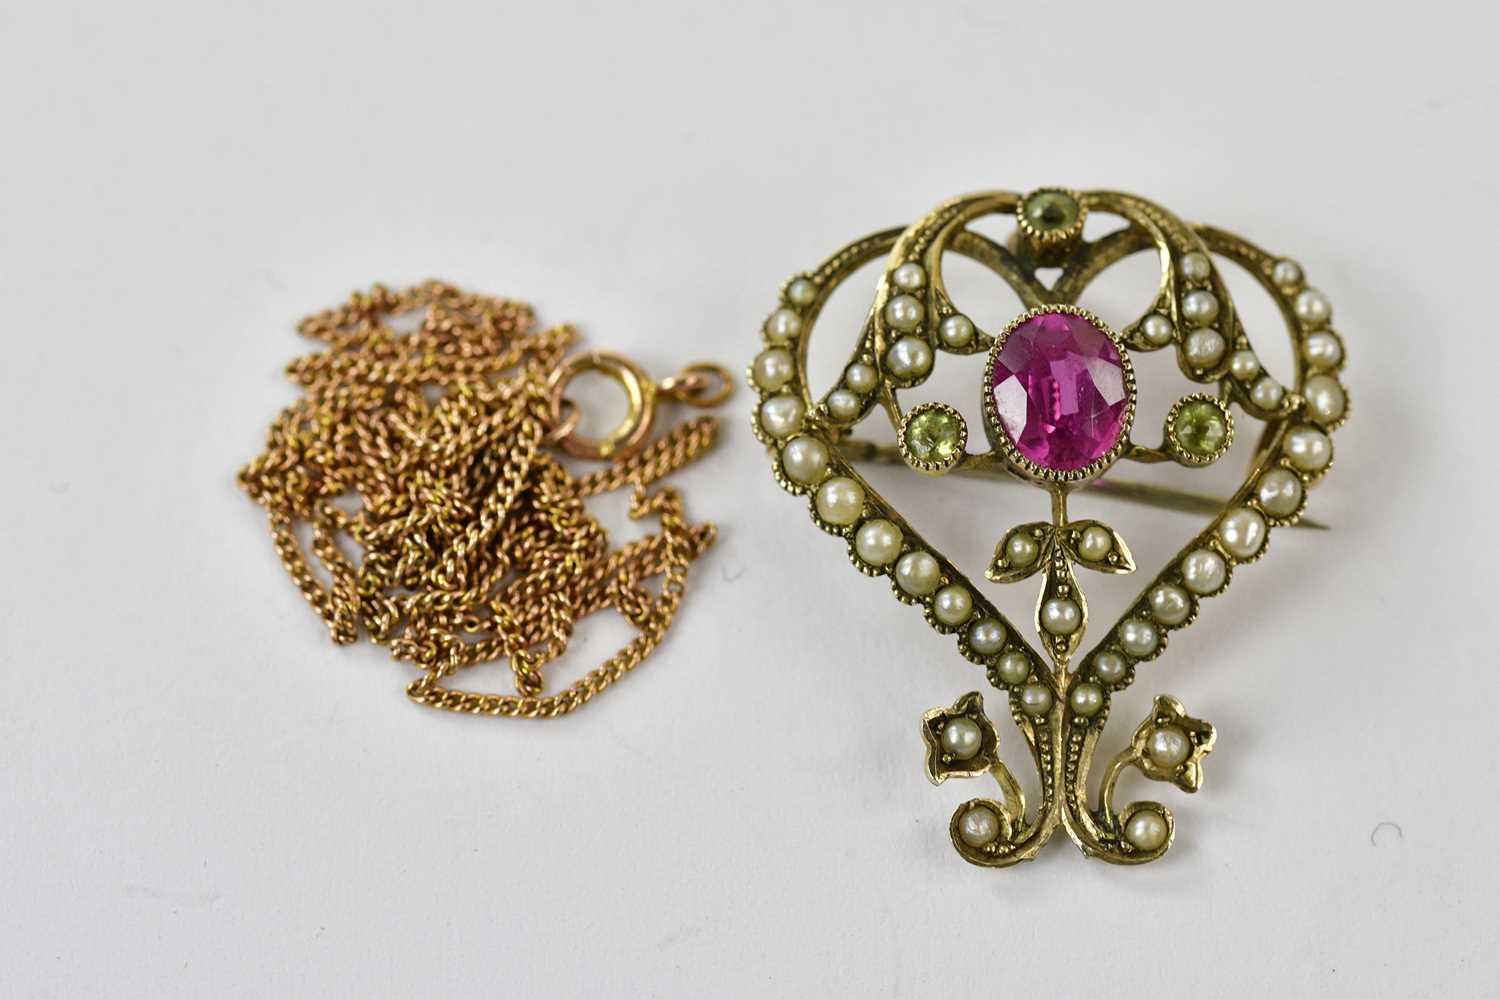 An Edwardian 9ct yellow gold seed pearl, peridot and pink sapphire brooch suspended on a 9ct gold